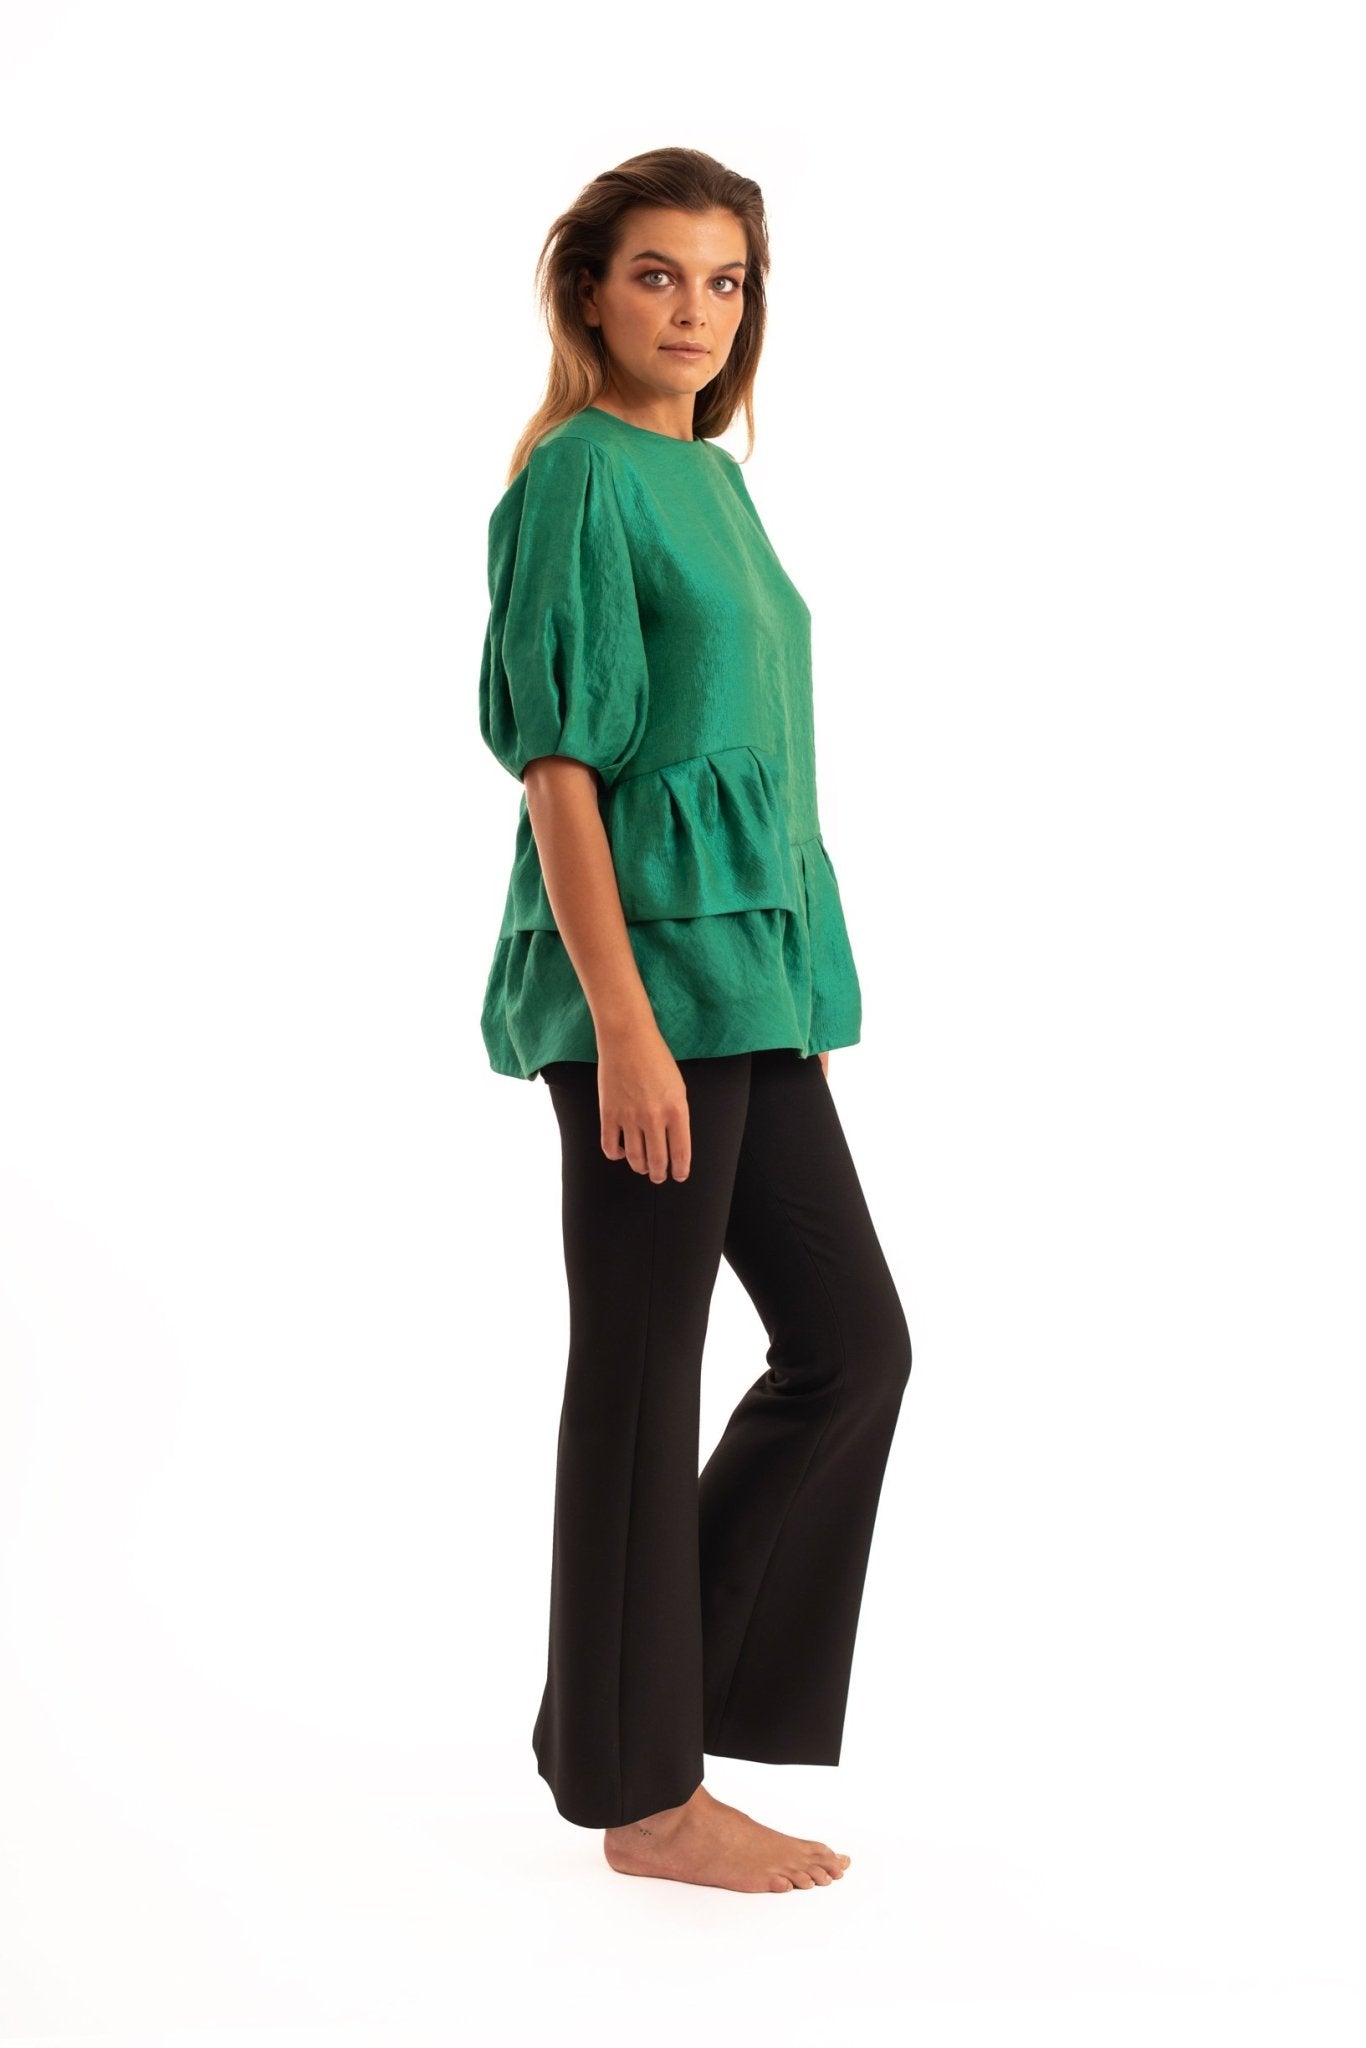 Green Layers Blouse - NOPIN - The Clothing LoungeNOPIN